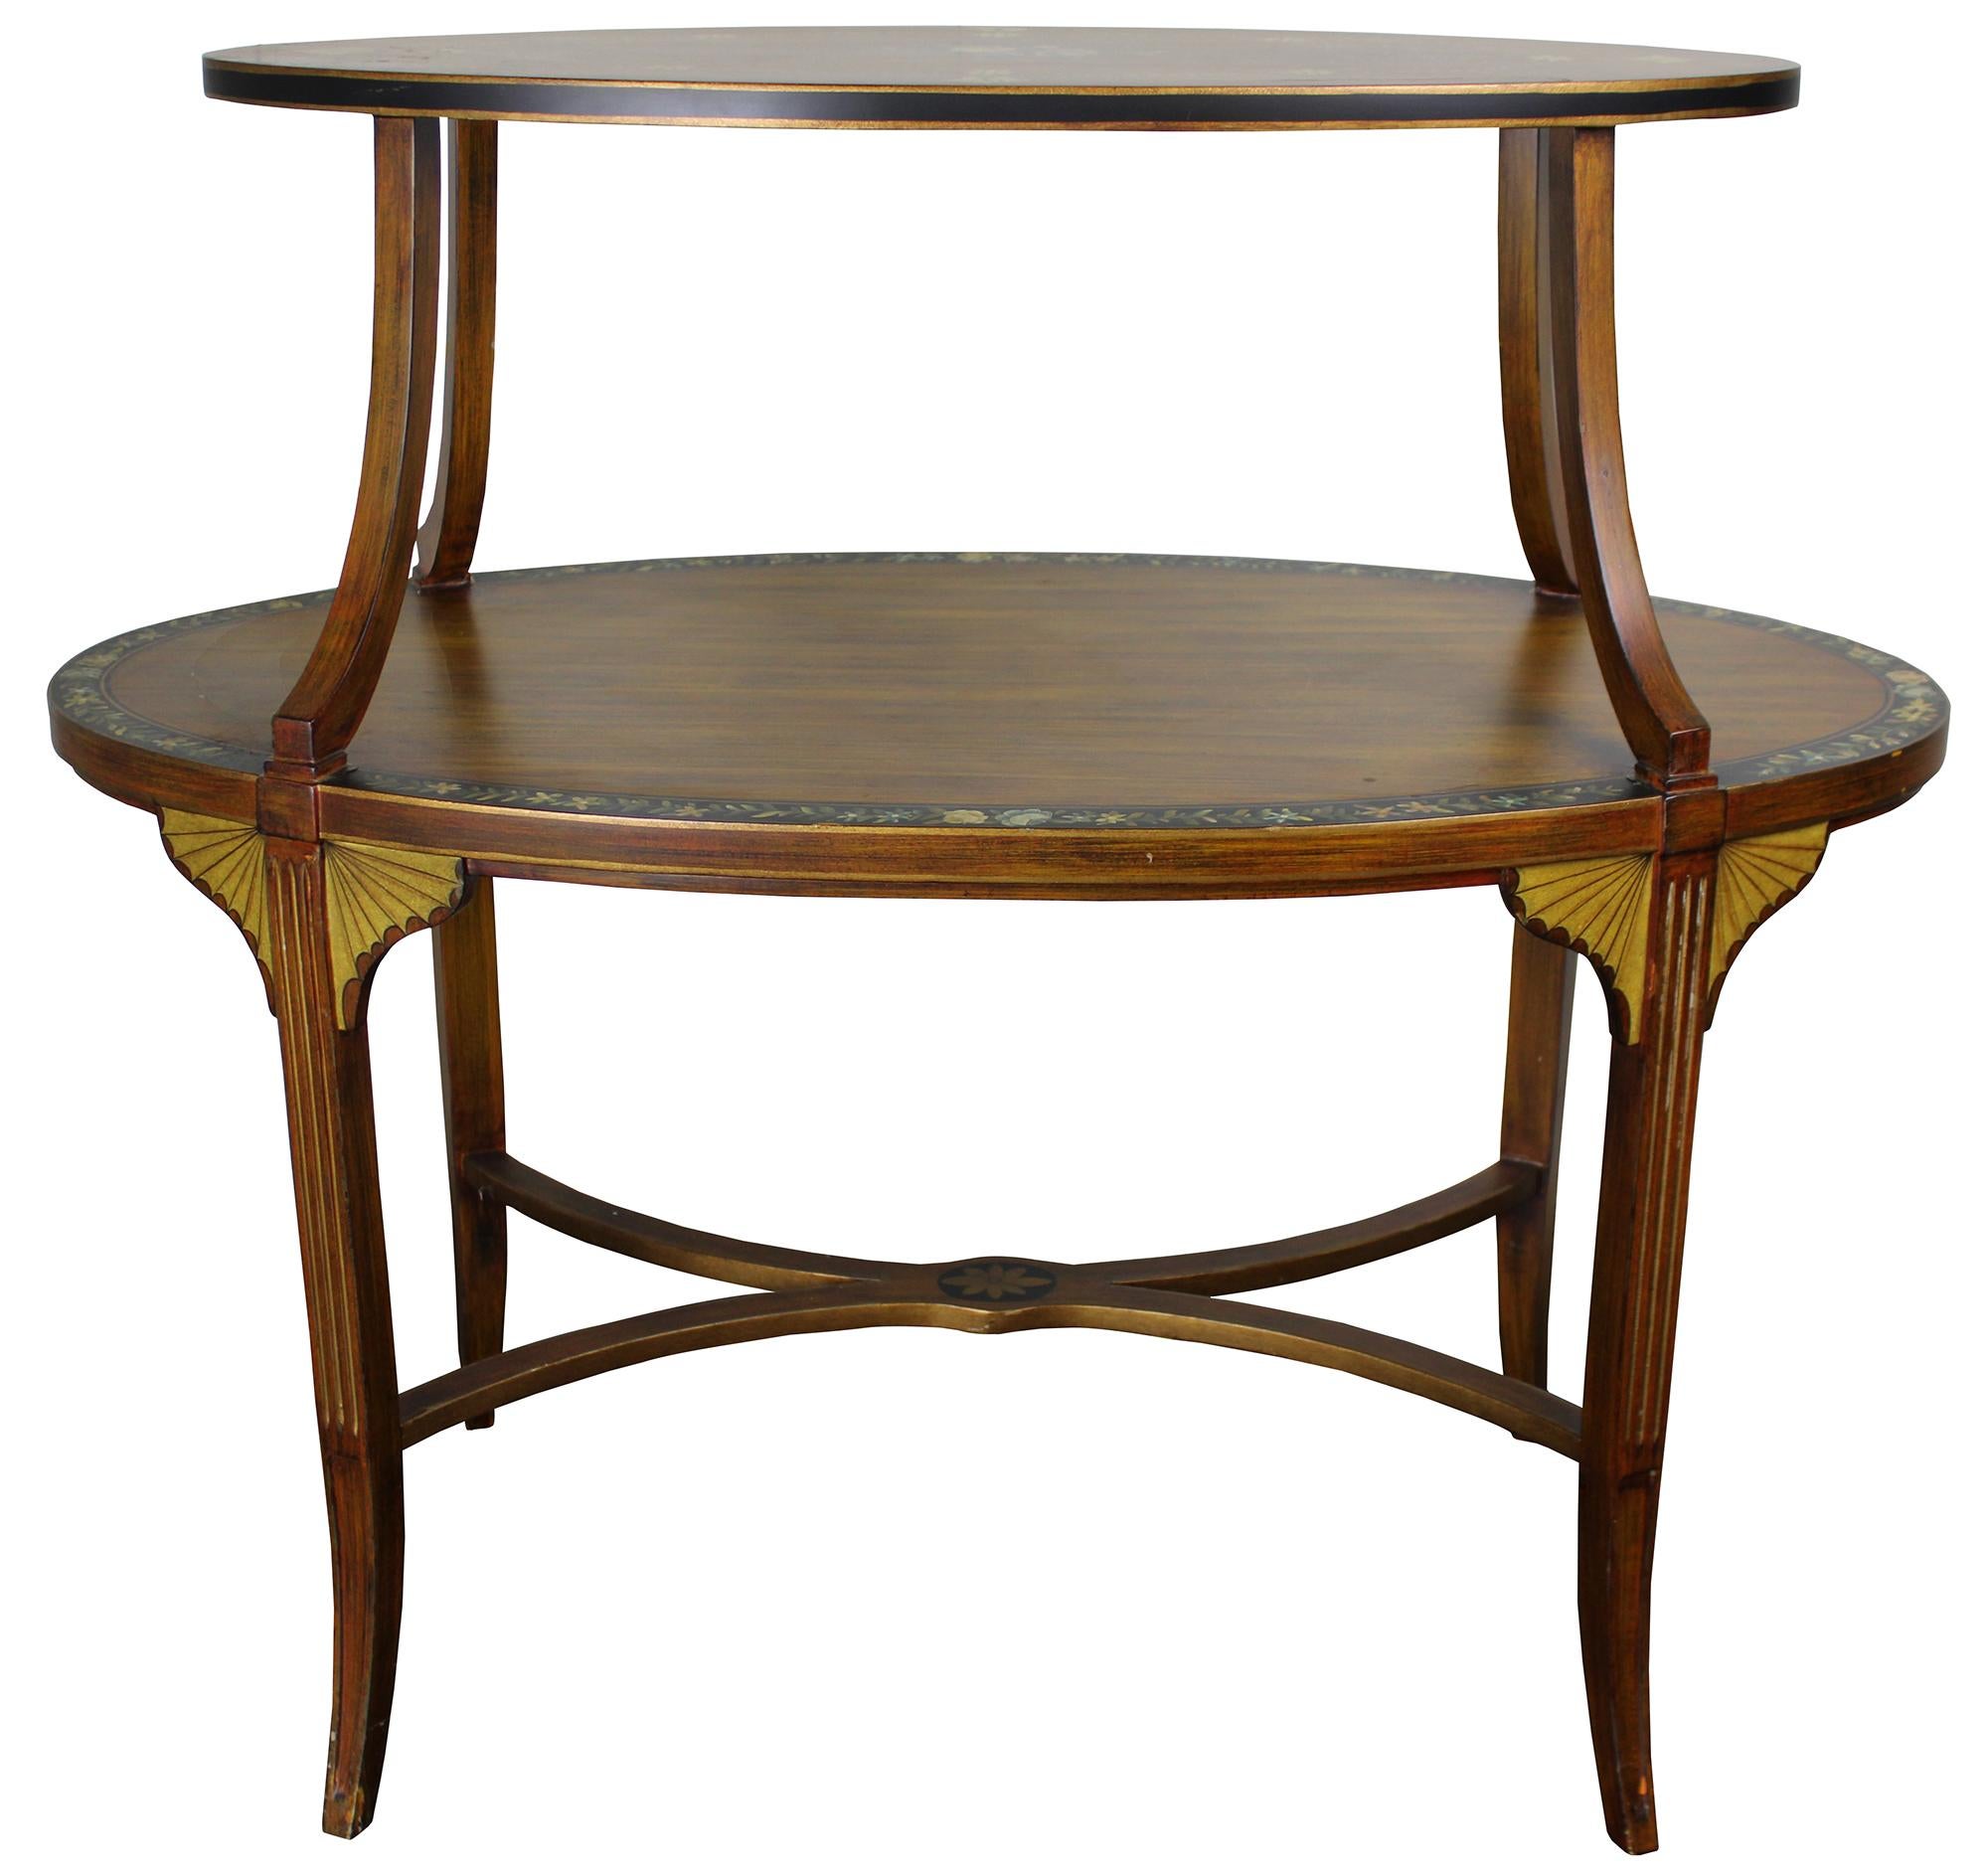 Late 20th century Edwardian inspired tray top Étagère by Sarreid Ltd. Features oval surfaces with a painted grain, black trim and floral painted detail. Incudes a neoclassical inspired x stretcher, fluted legs and winged trim in the style of inlay.